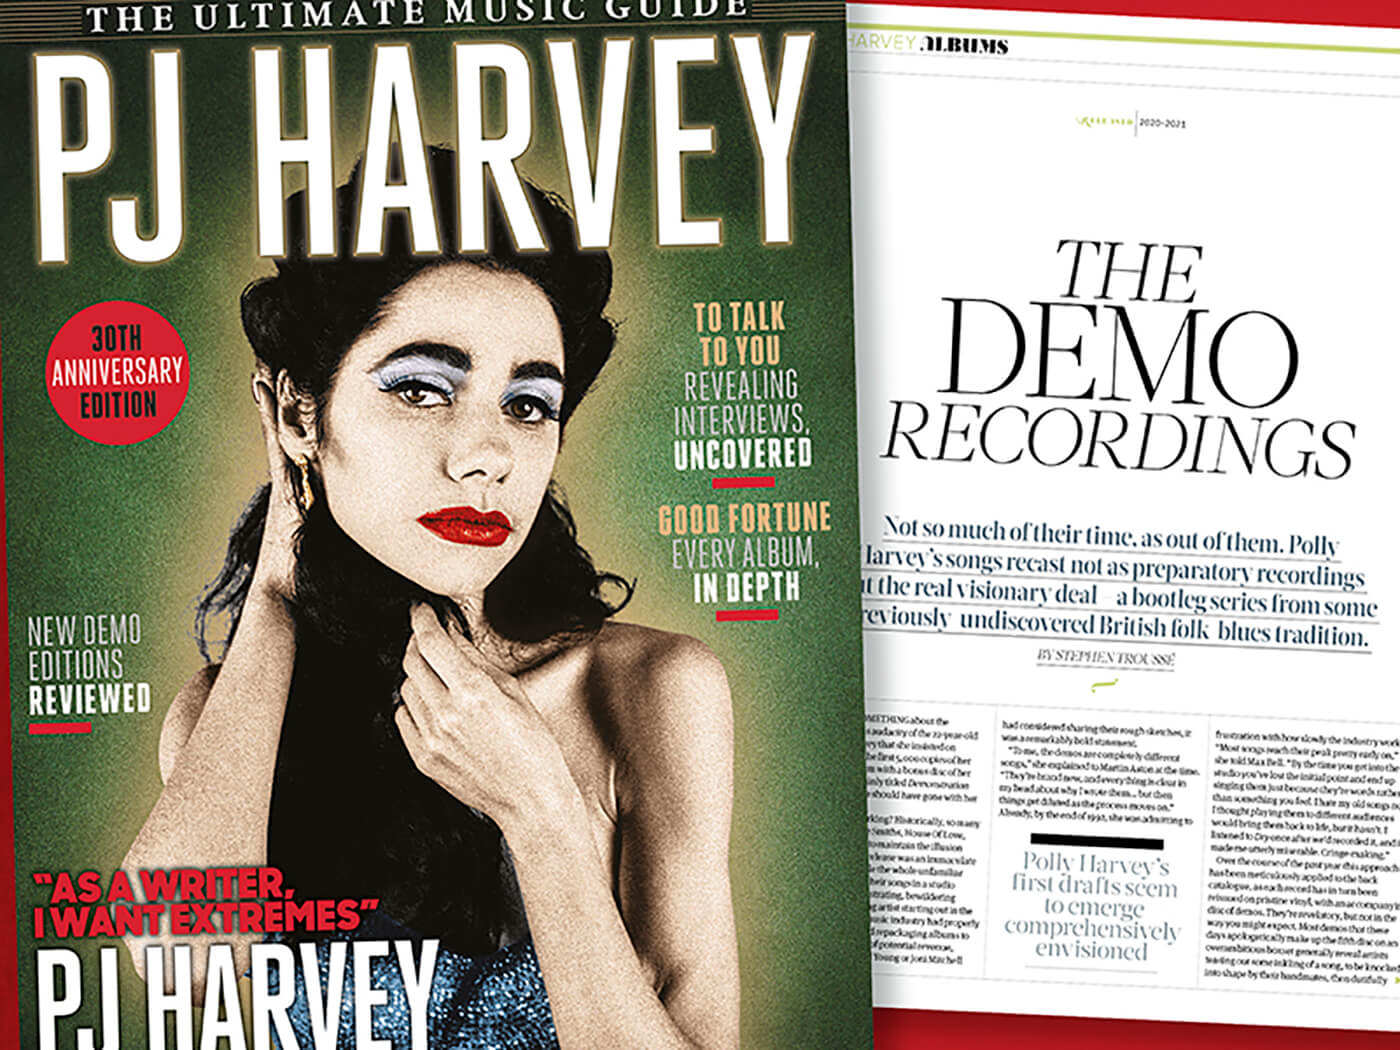 Introducing the Deluxe Ultimate Music Guide to PJ Harvey UNCUT